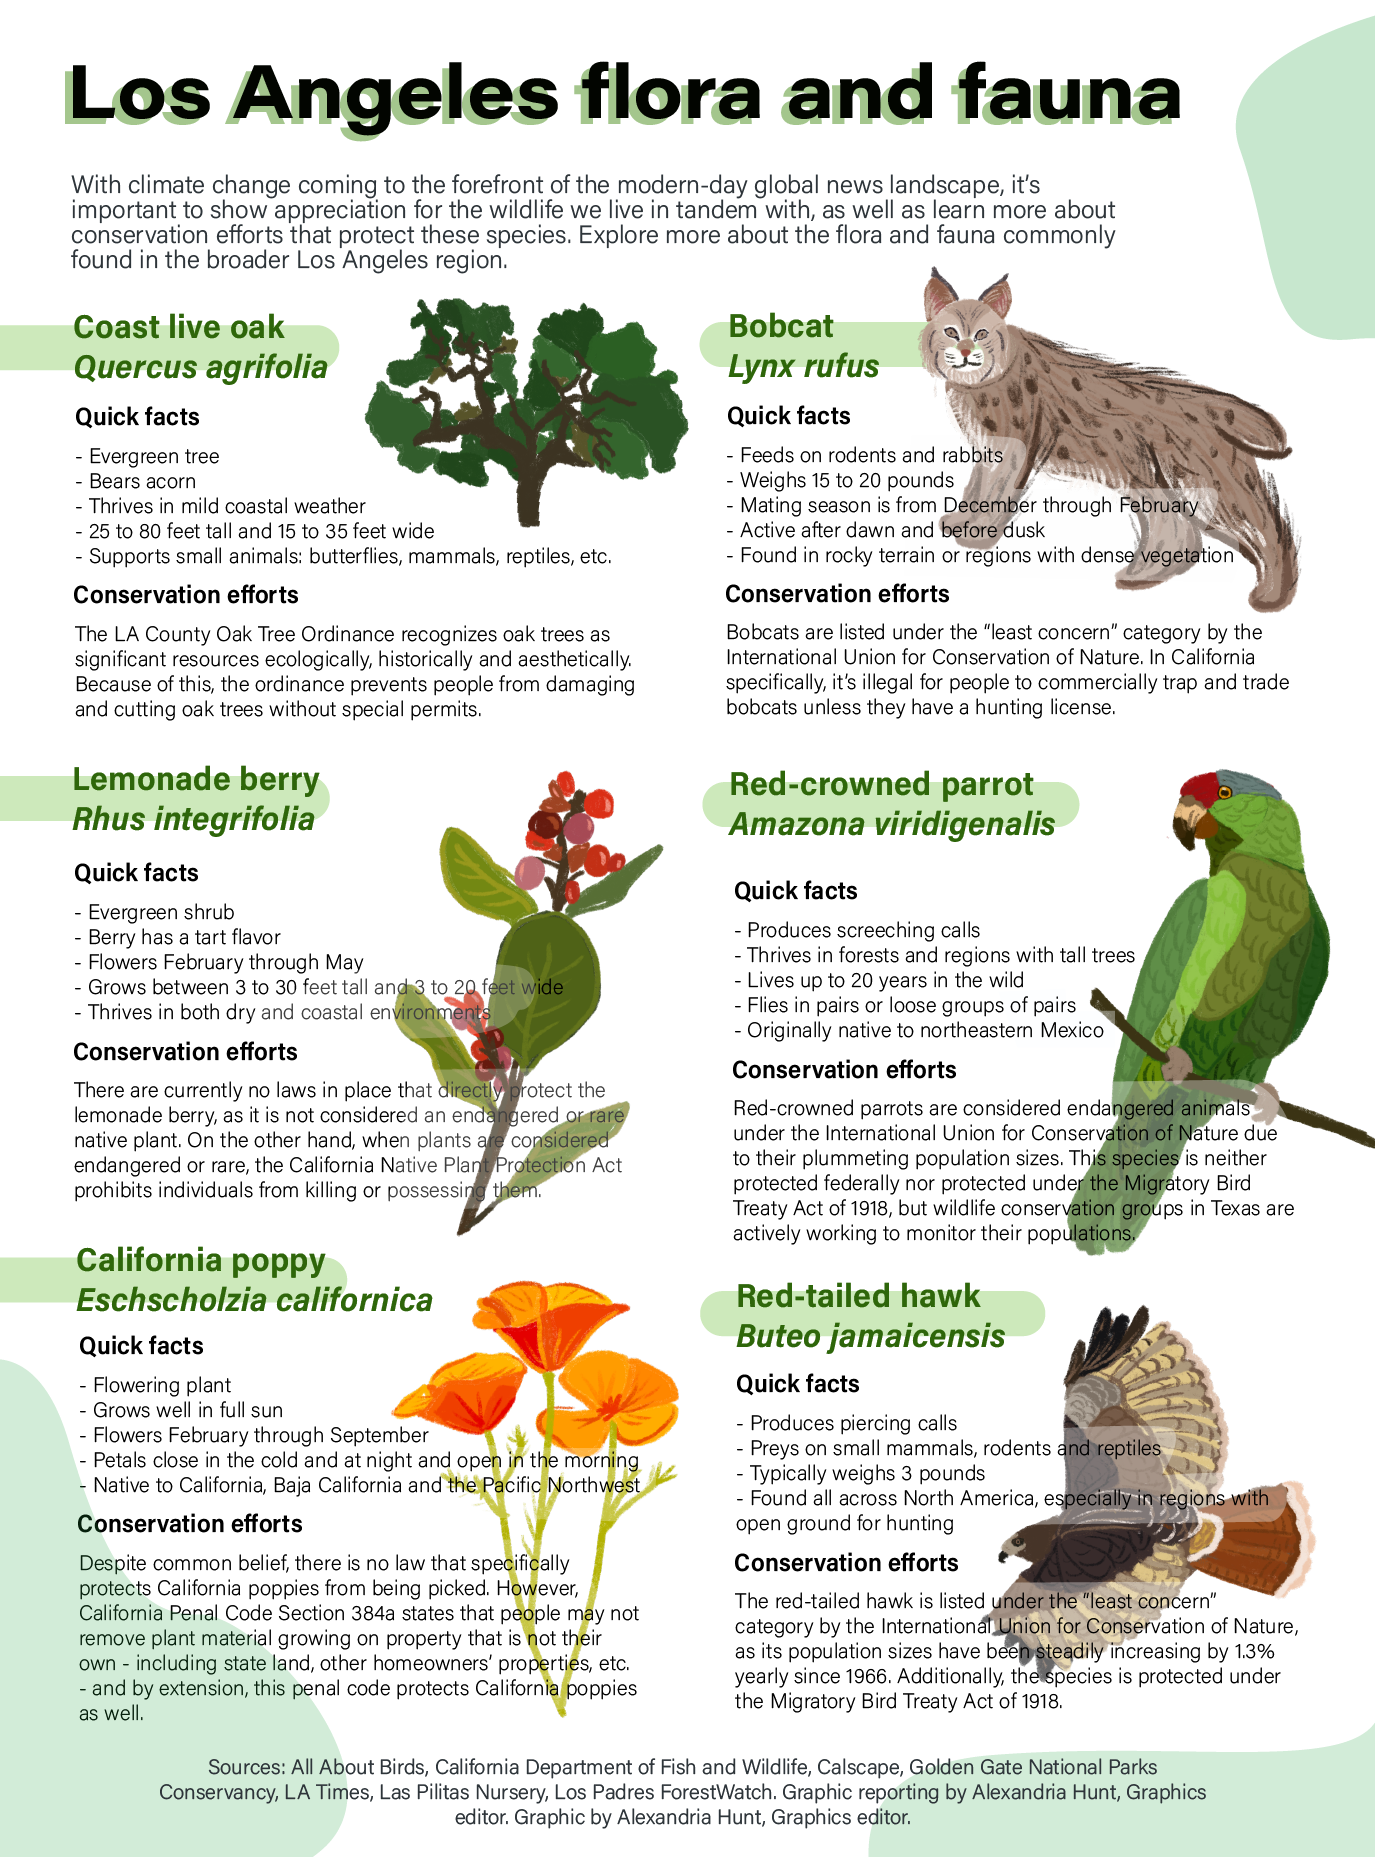 Graphic: Los Angeles flora and fauna - Daily Bruin